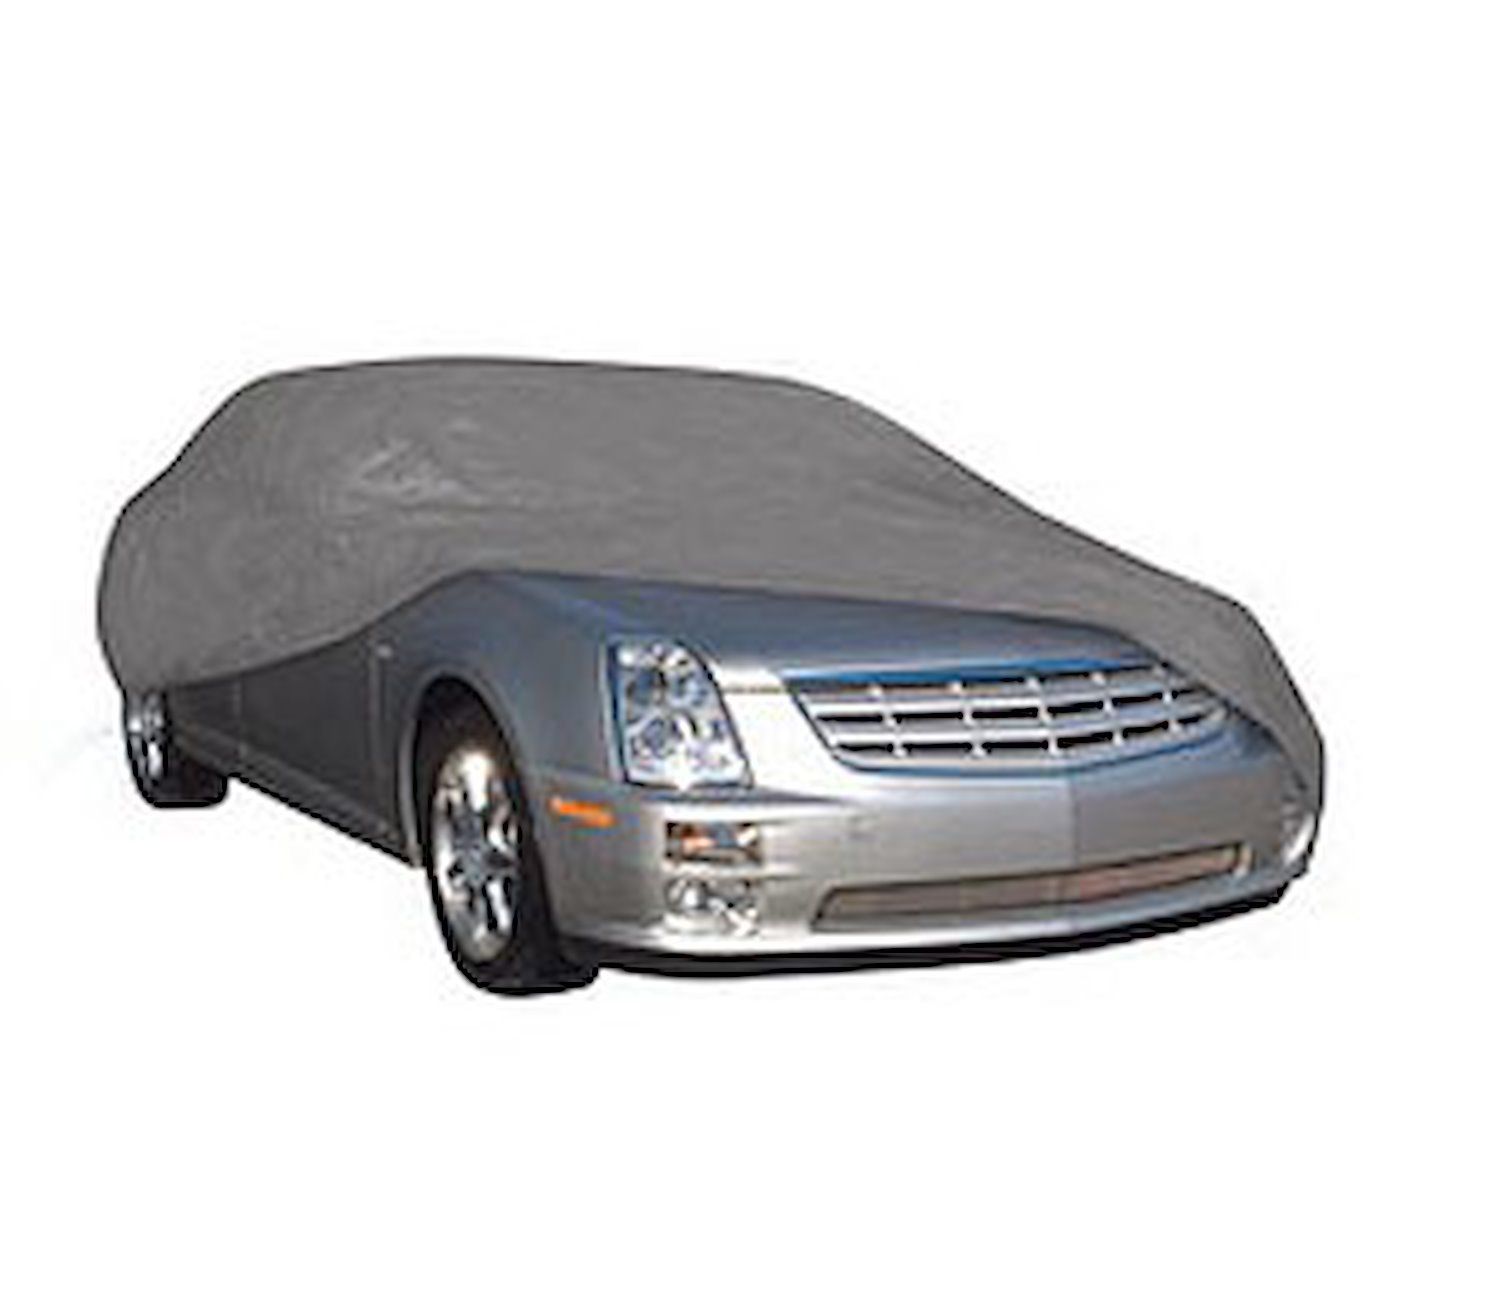 Rain Barrier Car Cover Fits Cars Up To 22" in Length